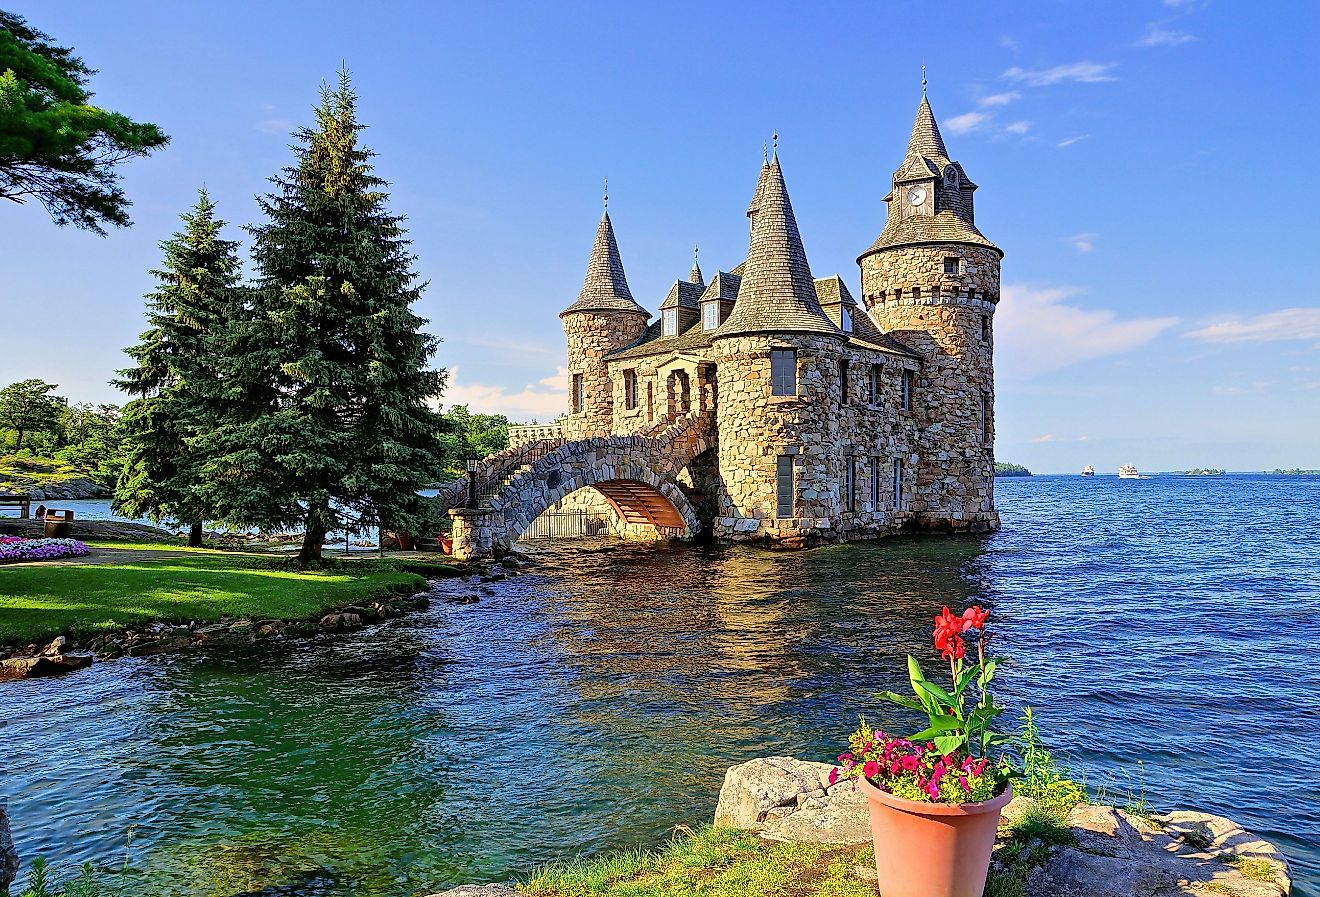 Castle on Heart Island, one of the Thousand Islands, New York state.